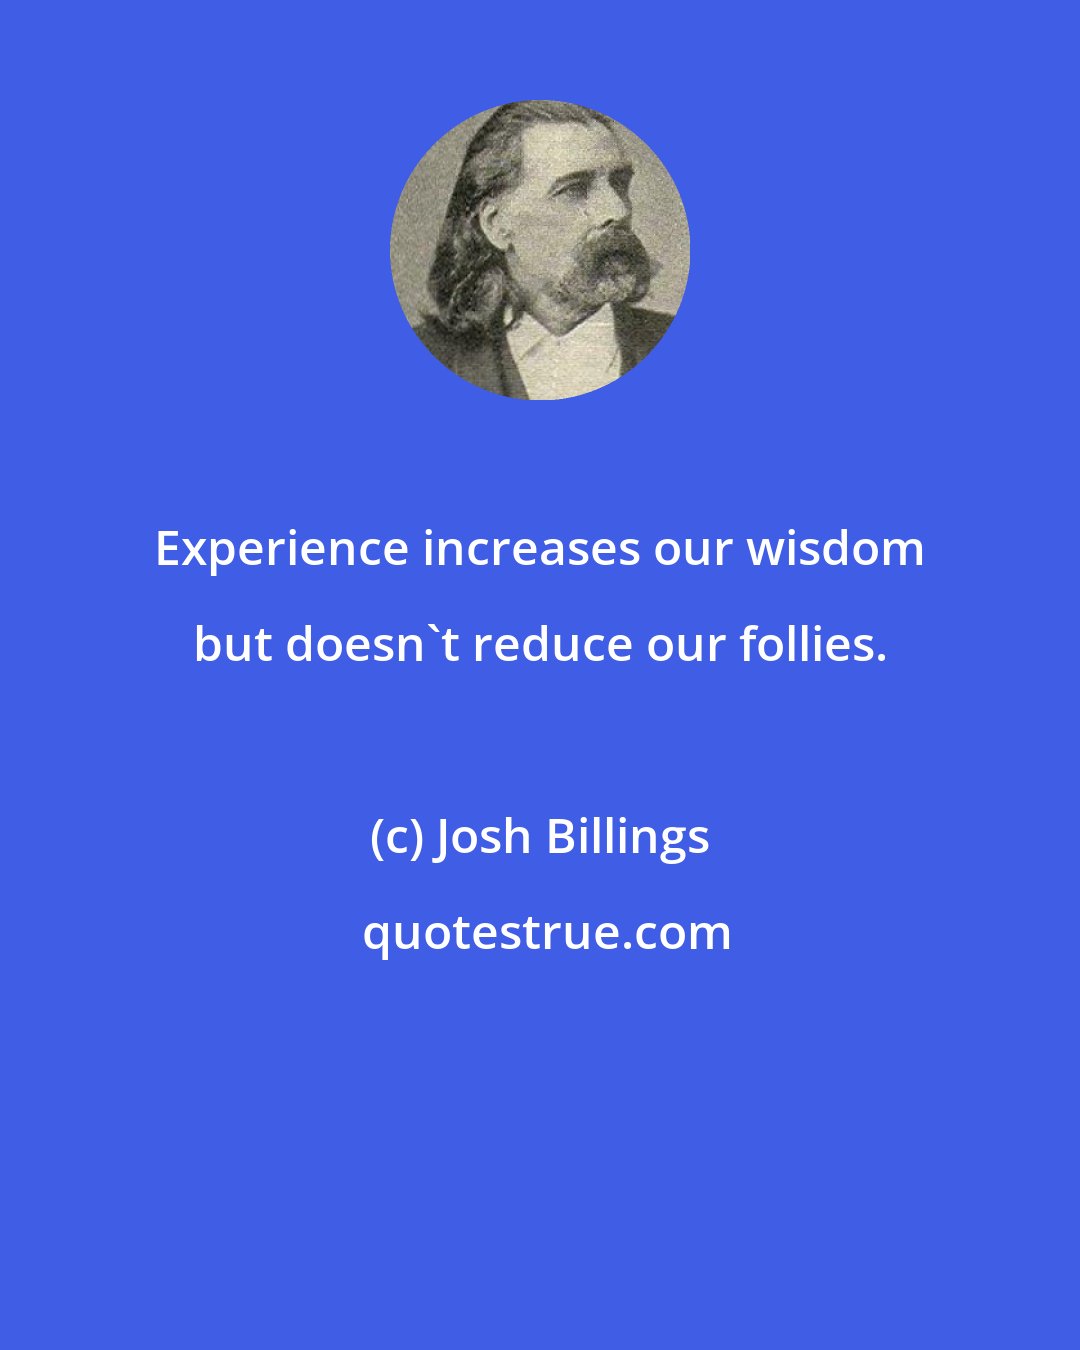 Josh Billings: Experience increases our wisdom but doesn't reduce our follies.